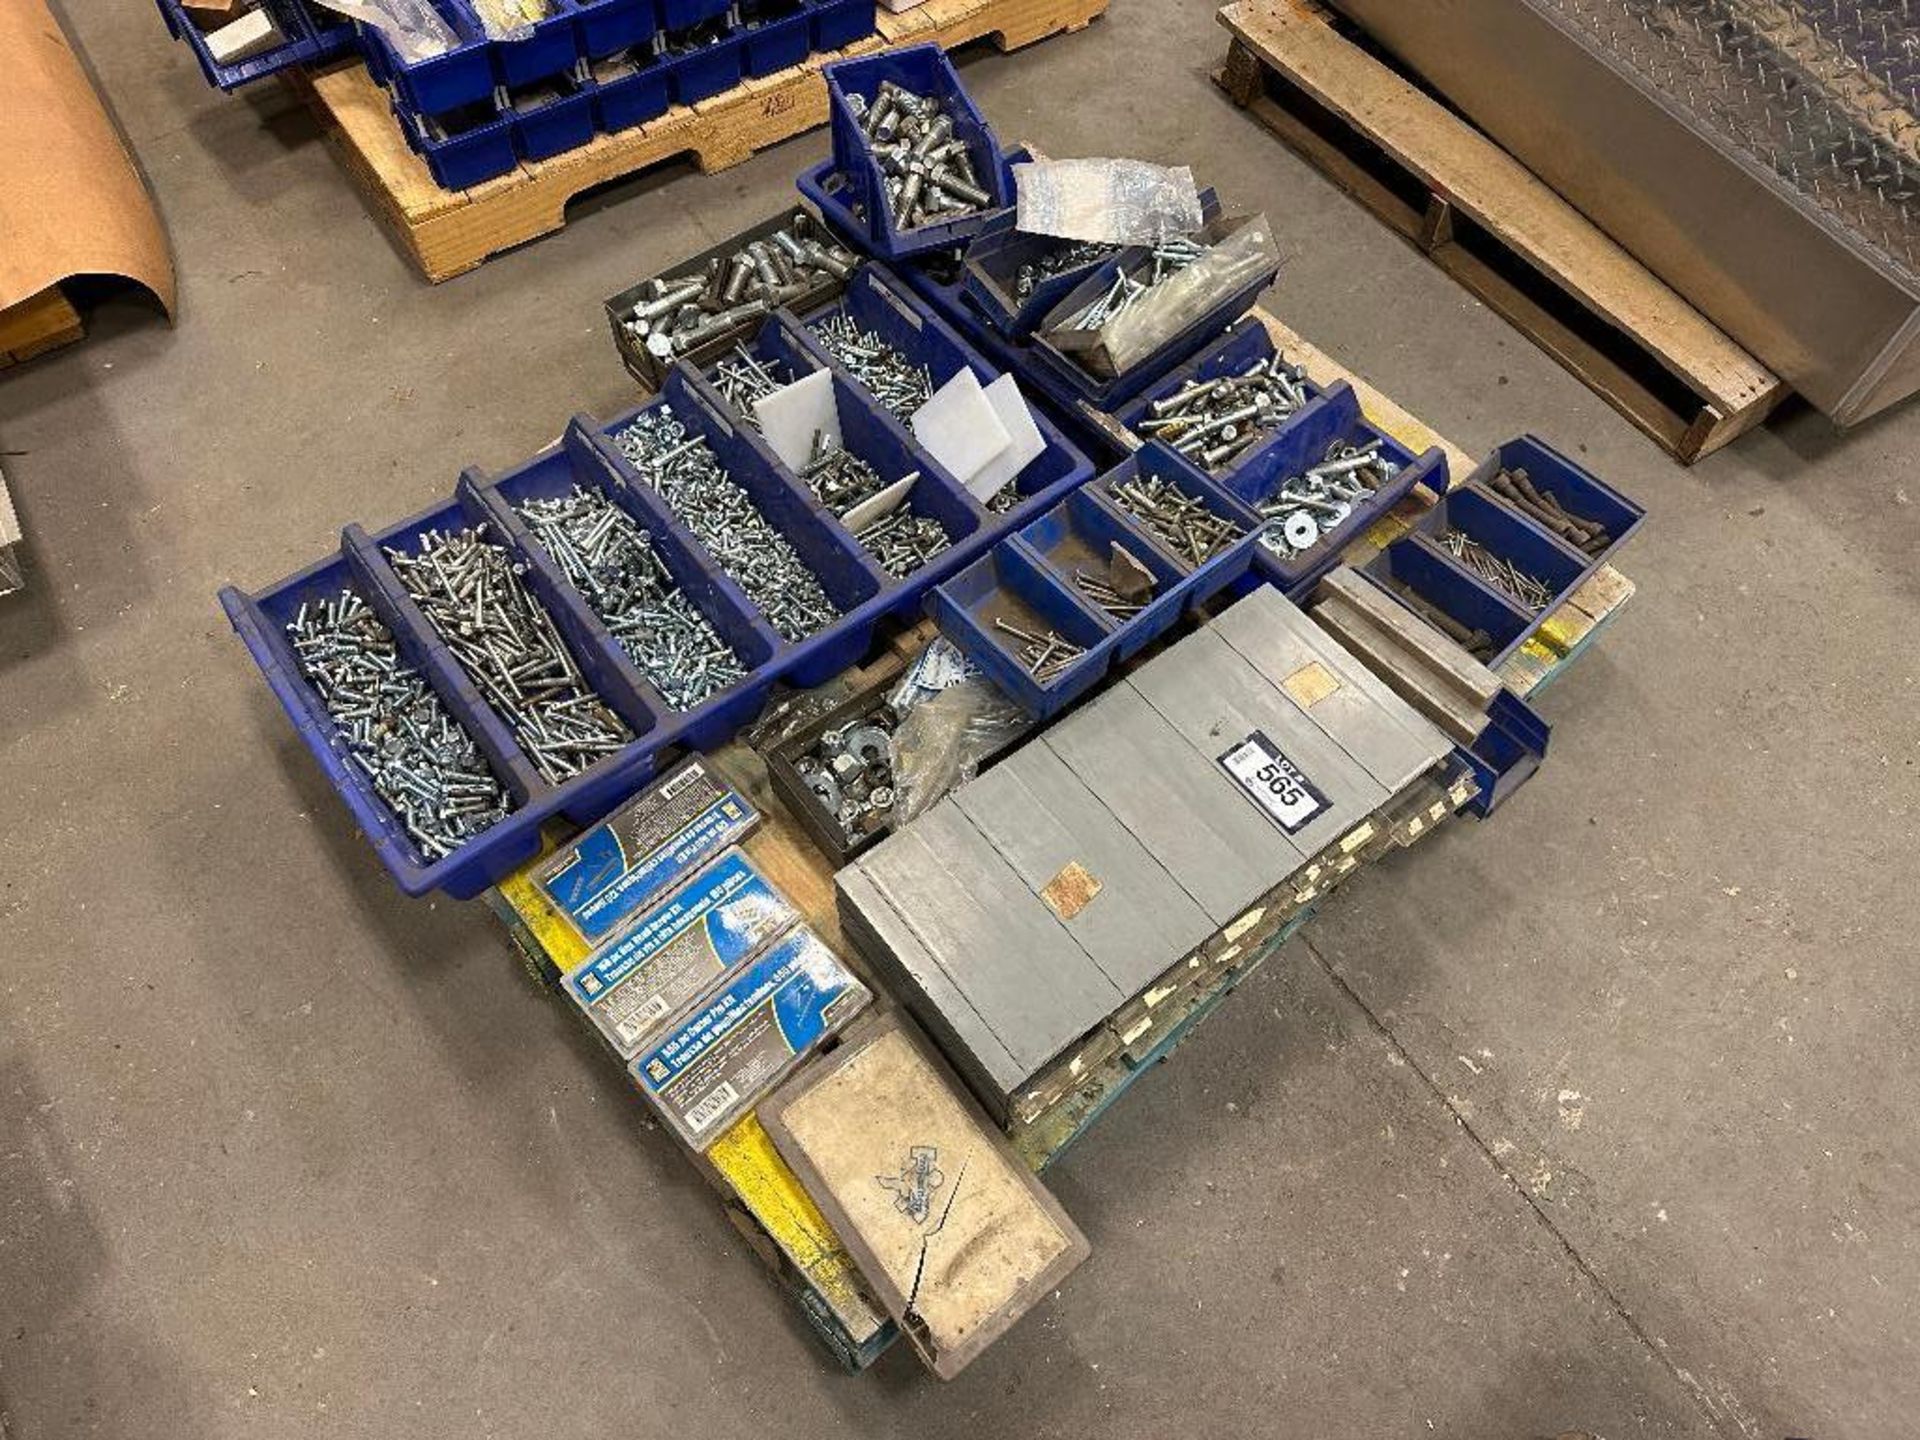 Pallet of Asst. Fasteners including Bolts, Nuts, etc.